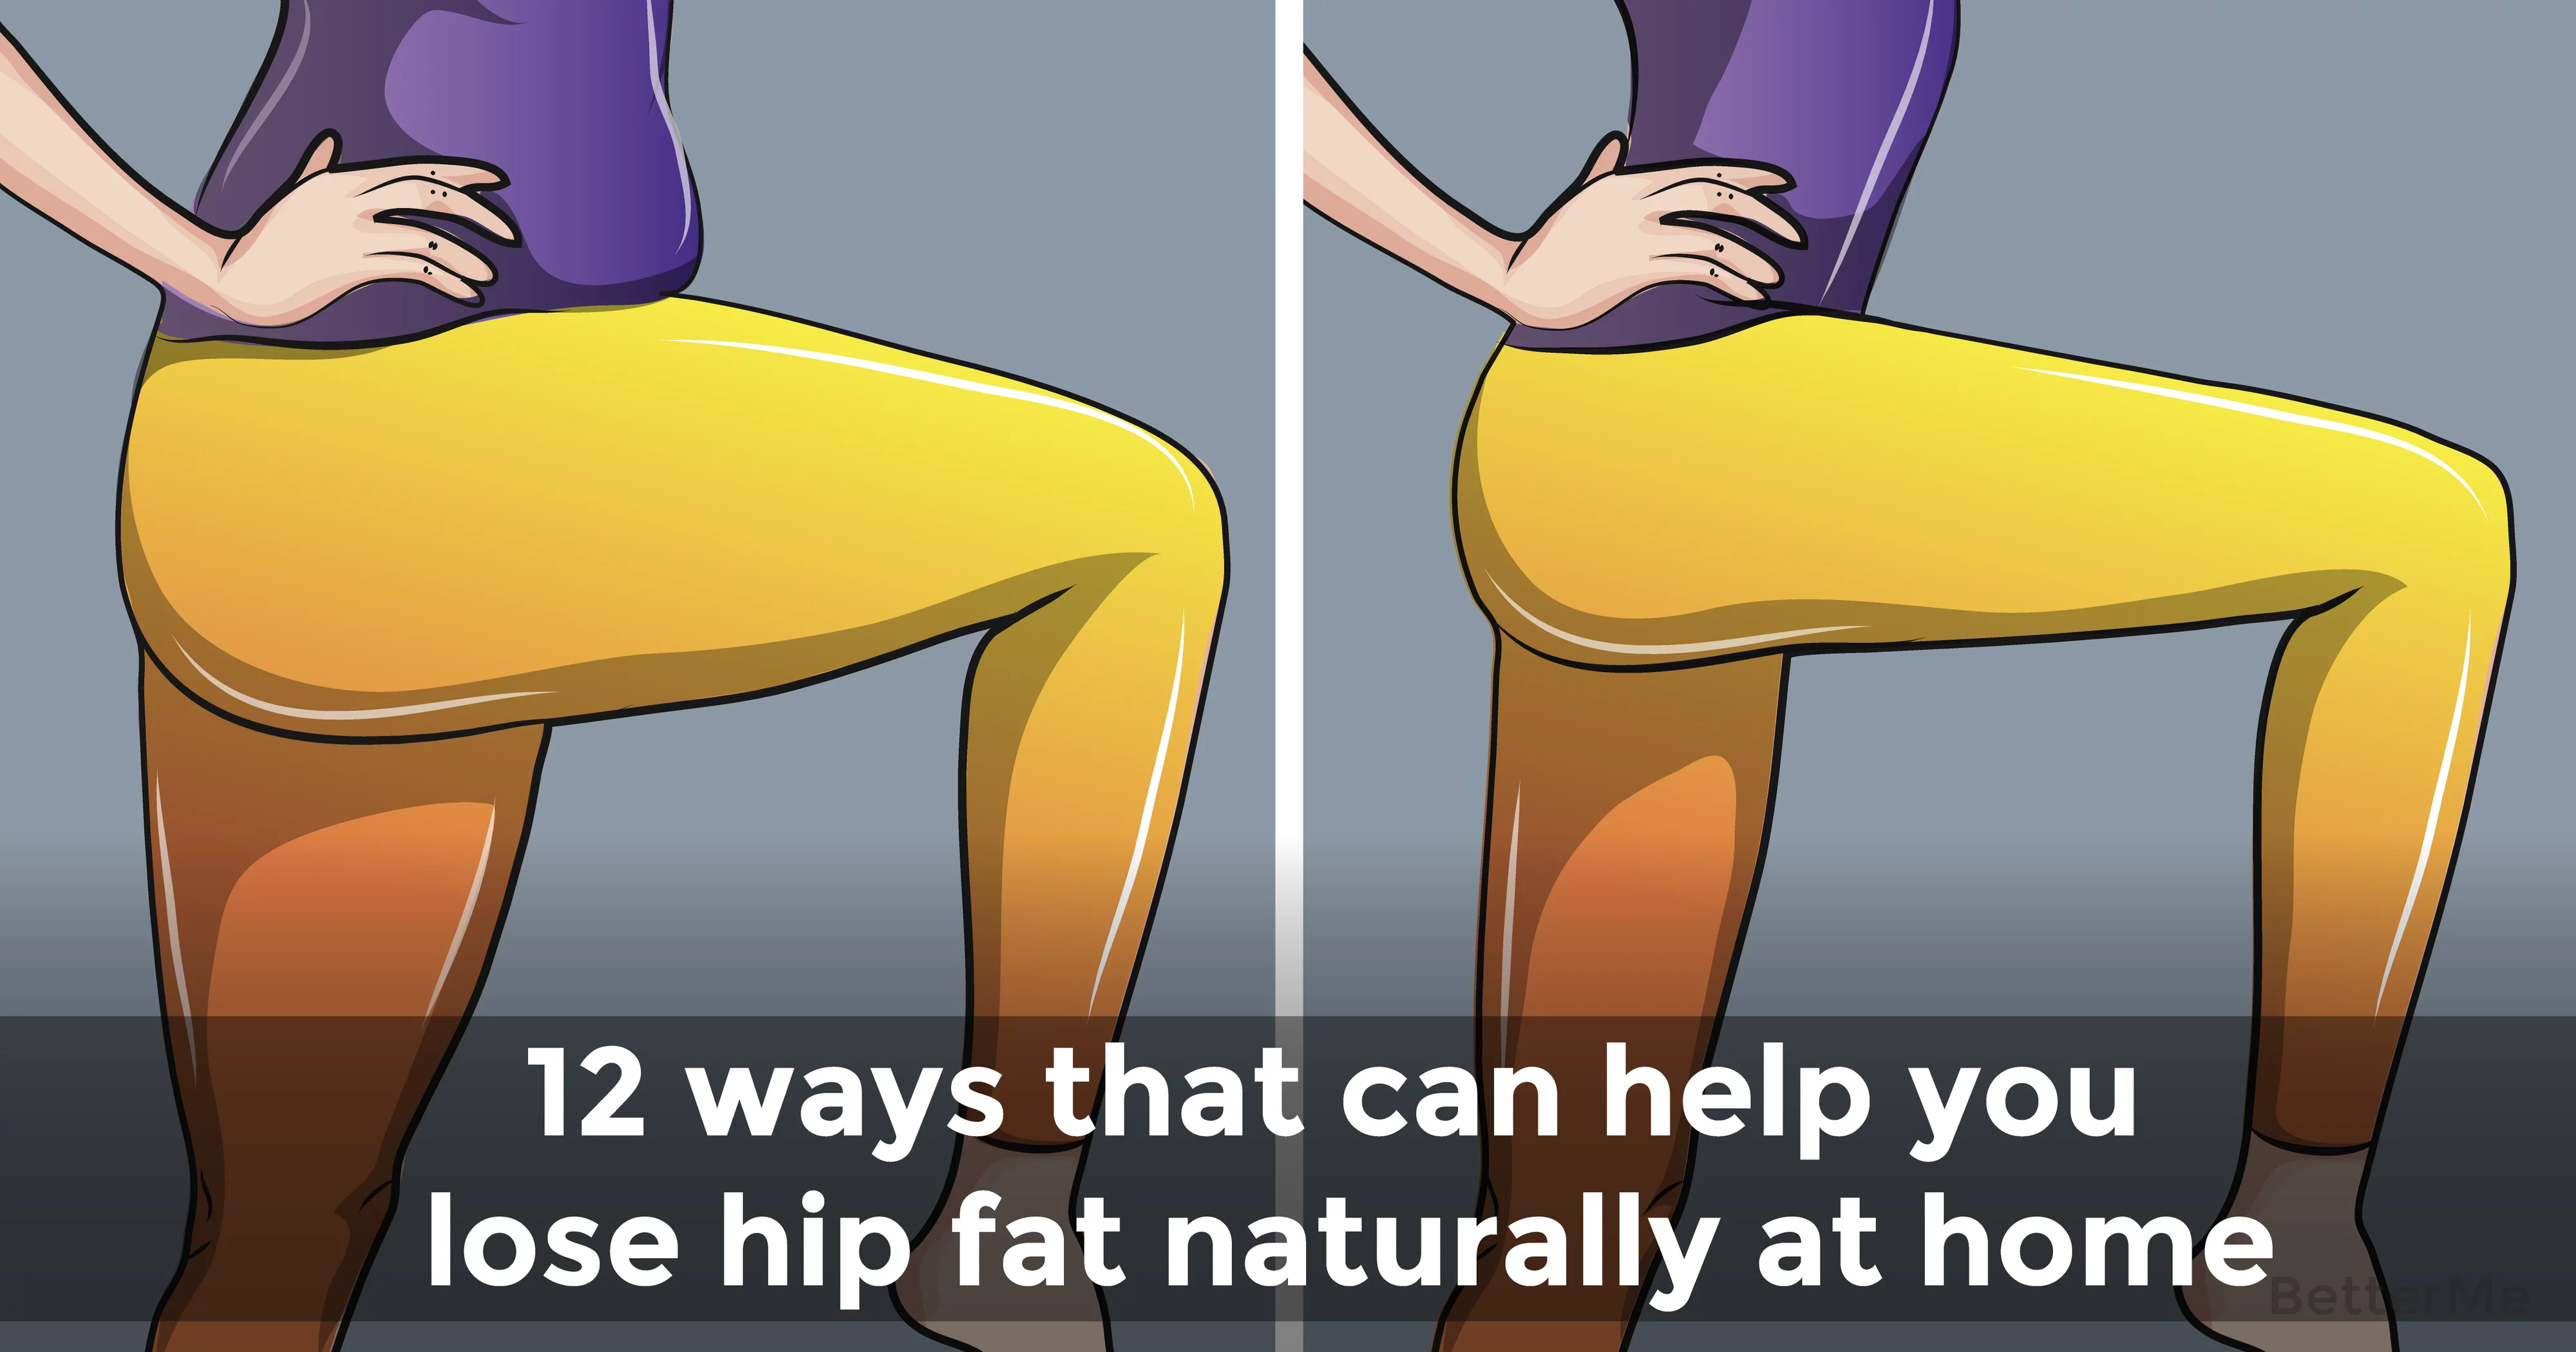 12 Ways Can Help Get Rid Of Hip Fat Naturally At Home